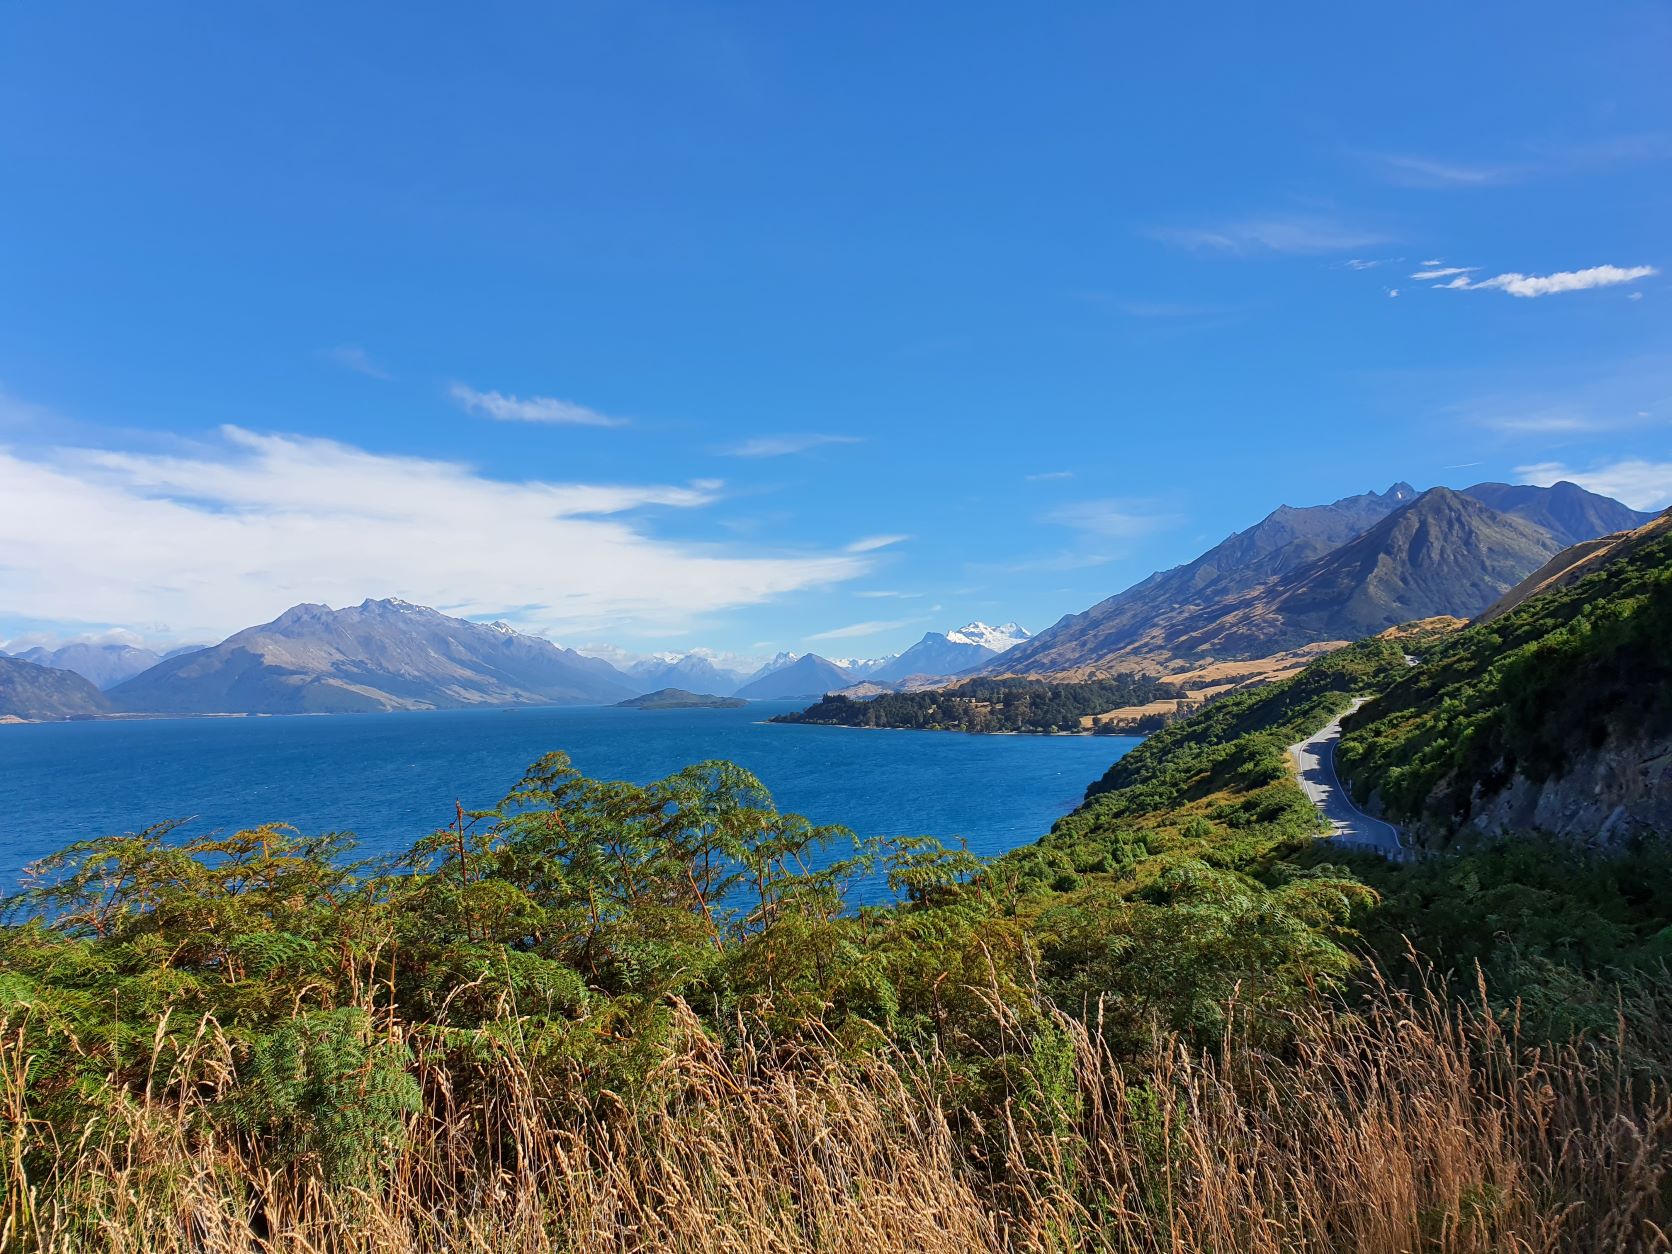 View of the Southern Alps from just outside of Queenstown